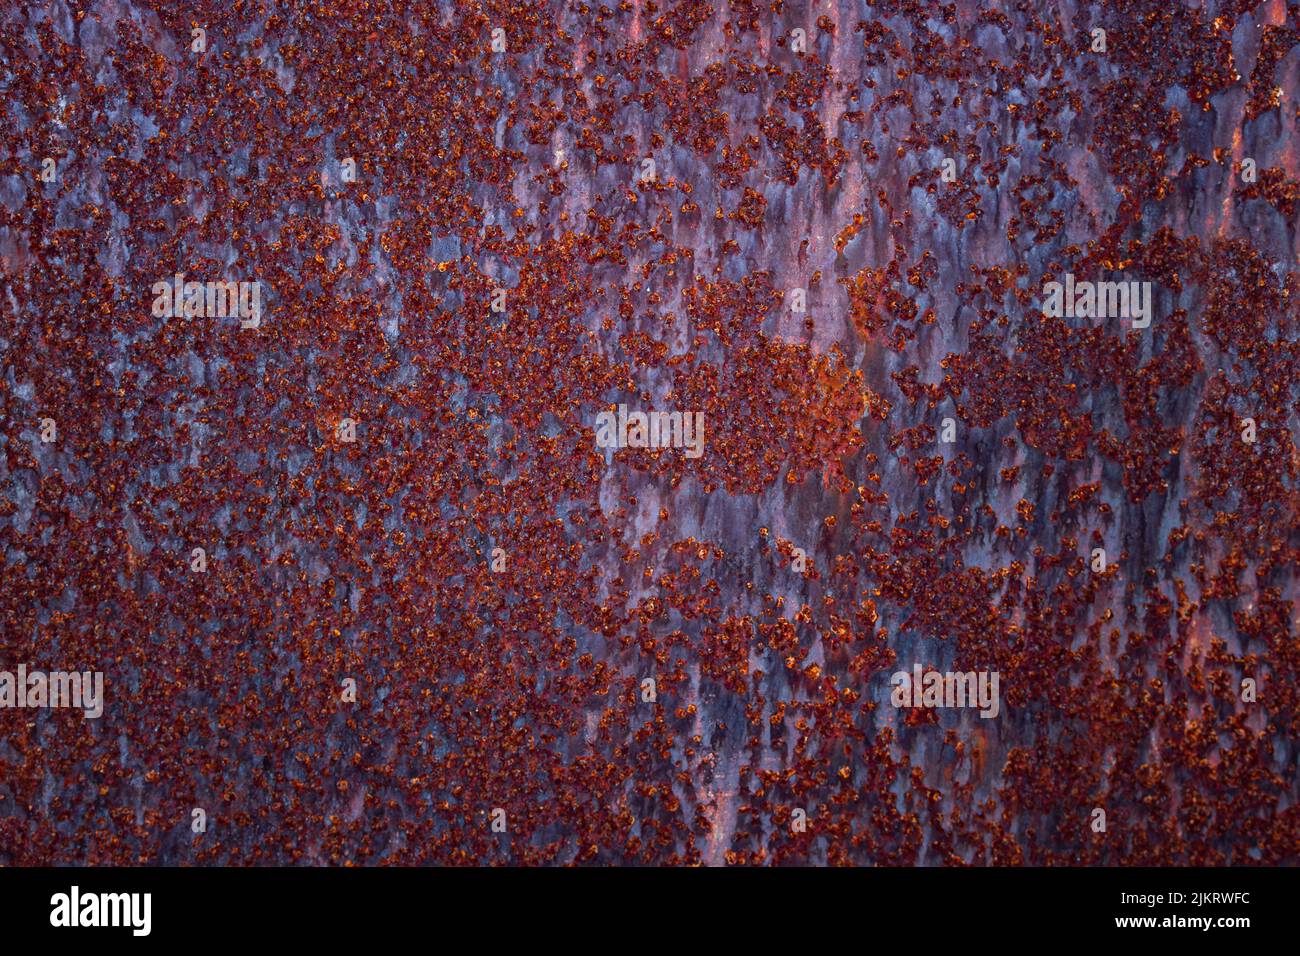 Corroded rusty metal texture with cracked red paint residues. Abstract background with empty space for text Stock Photo